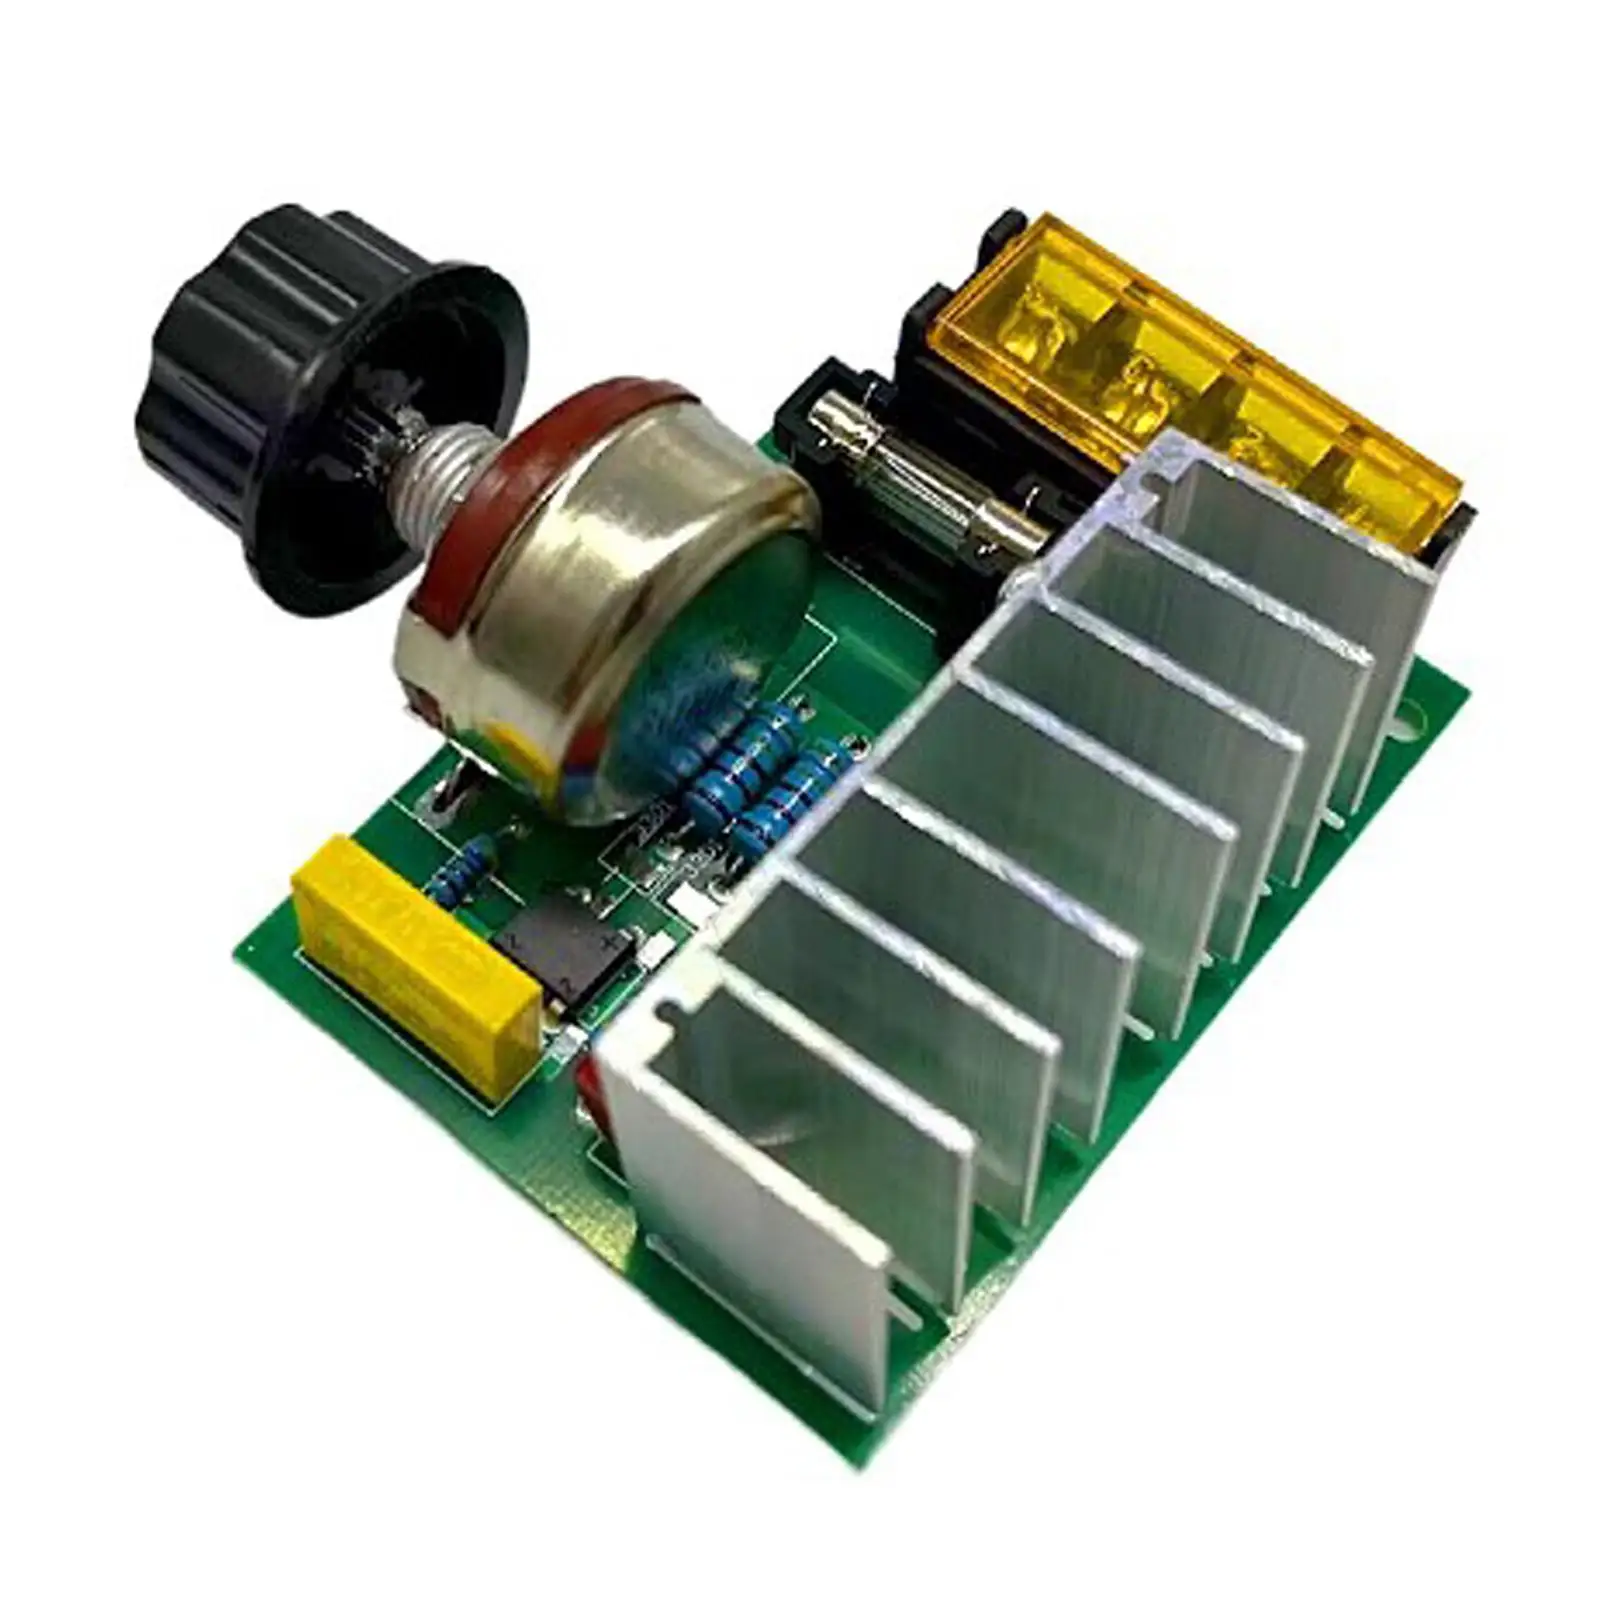 4000W 220V AC Scr Electric Voltage Regulator Professional Large Power Module High Performance Governor Motor Speed Controller